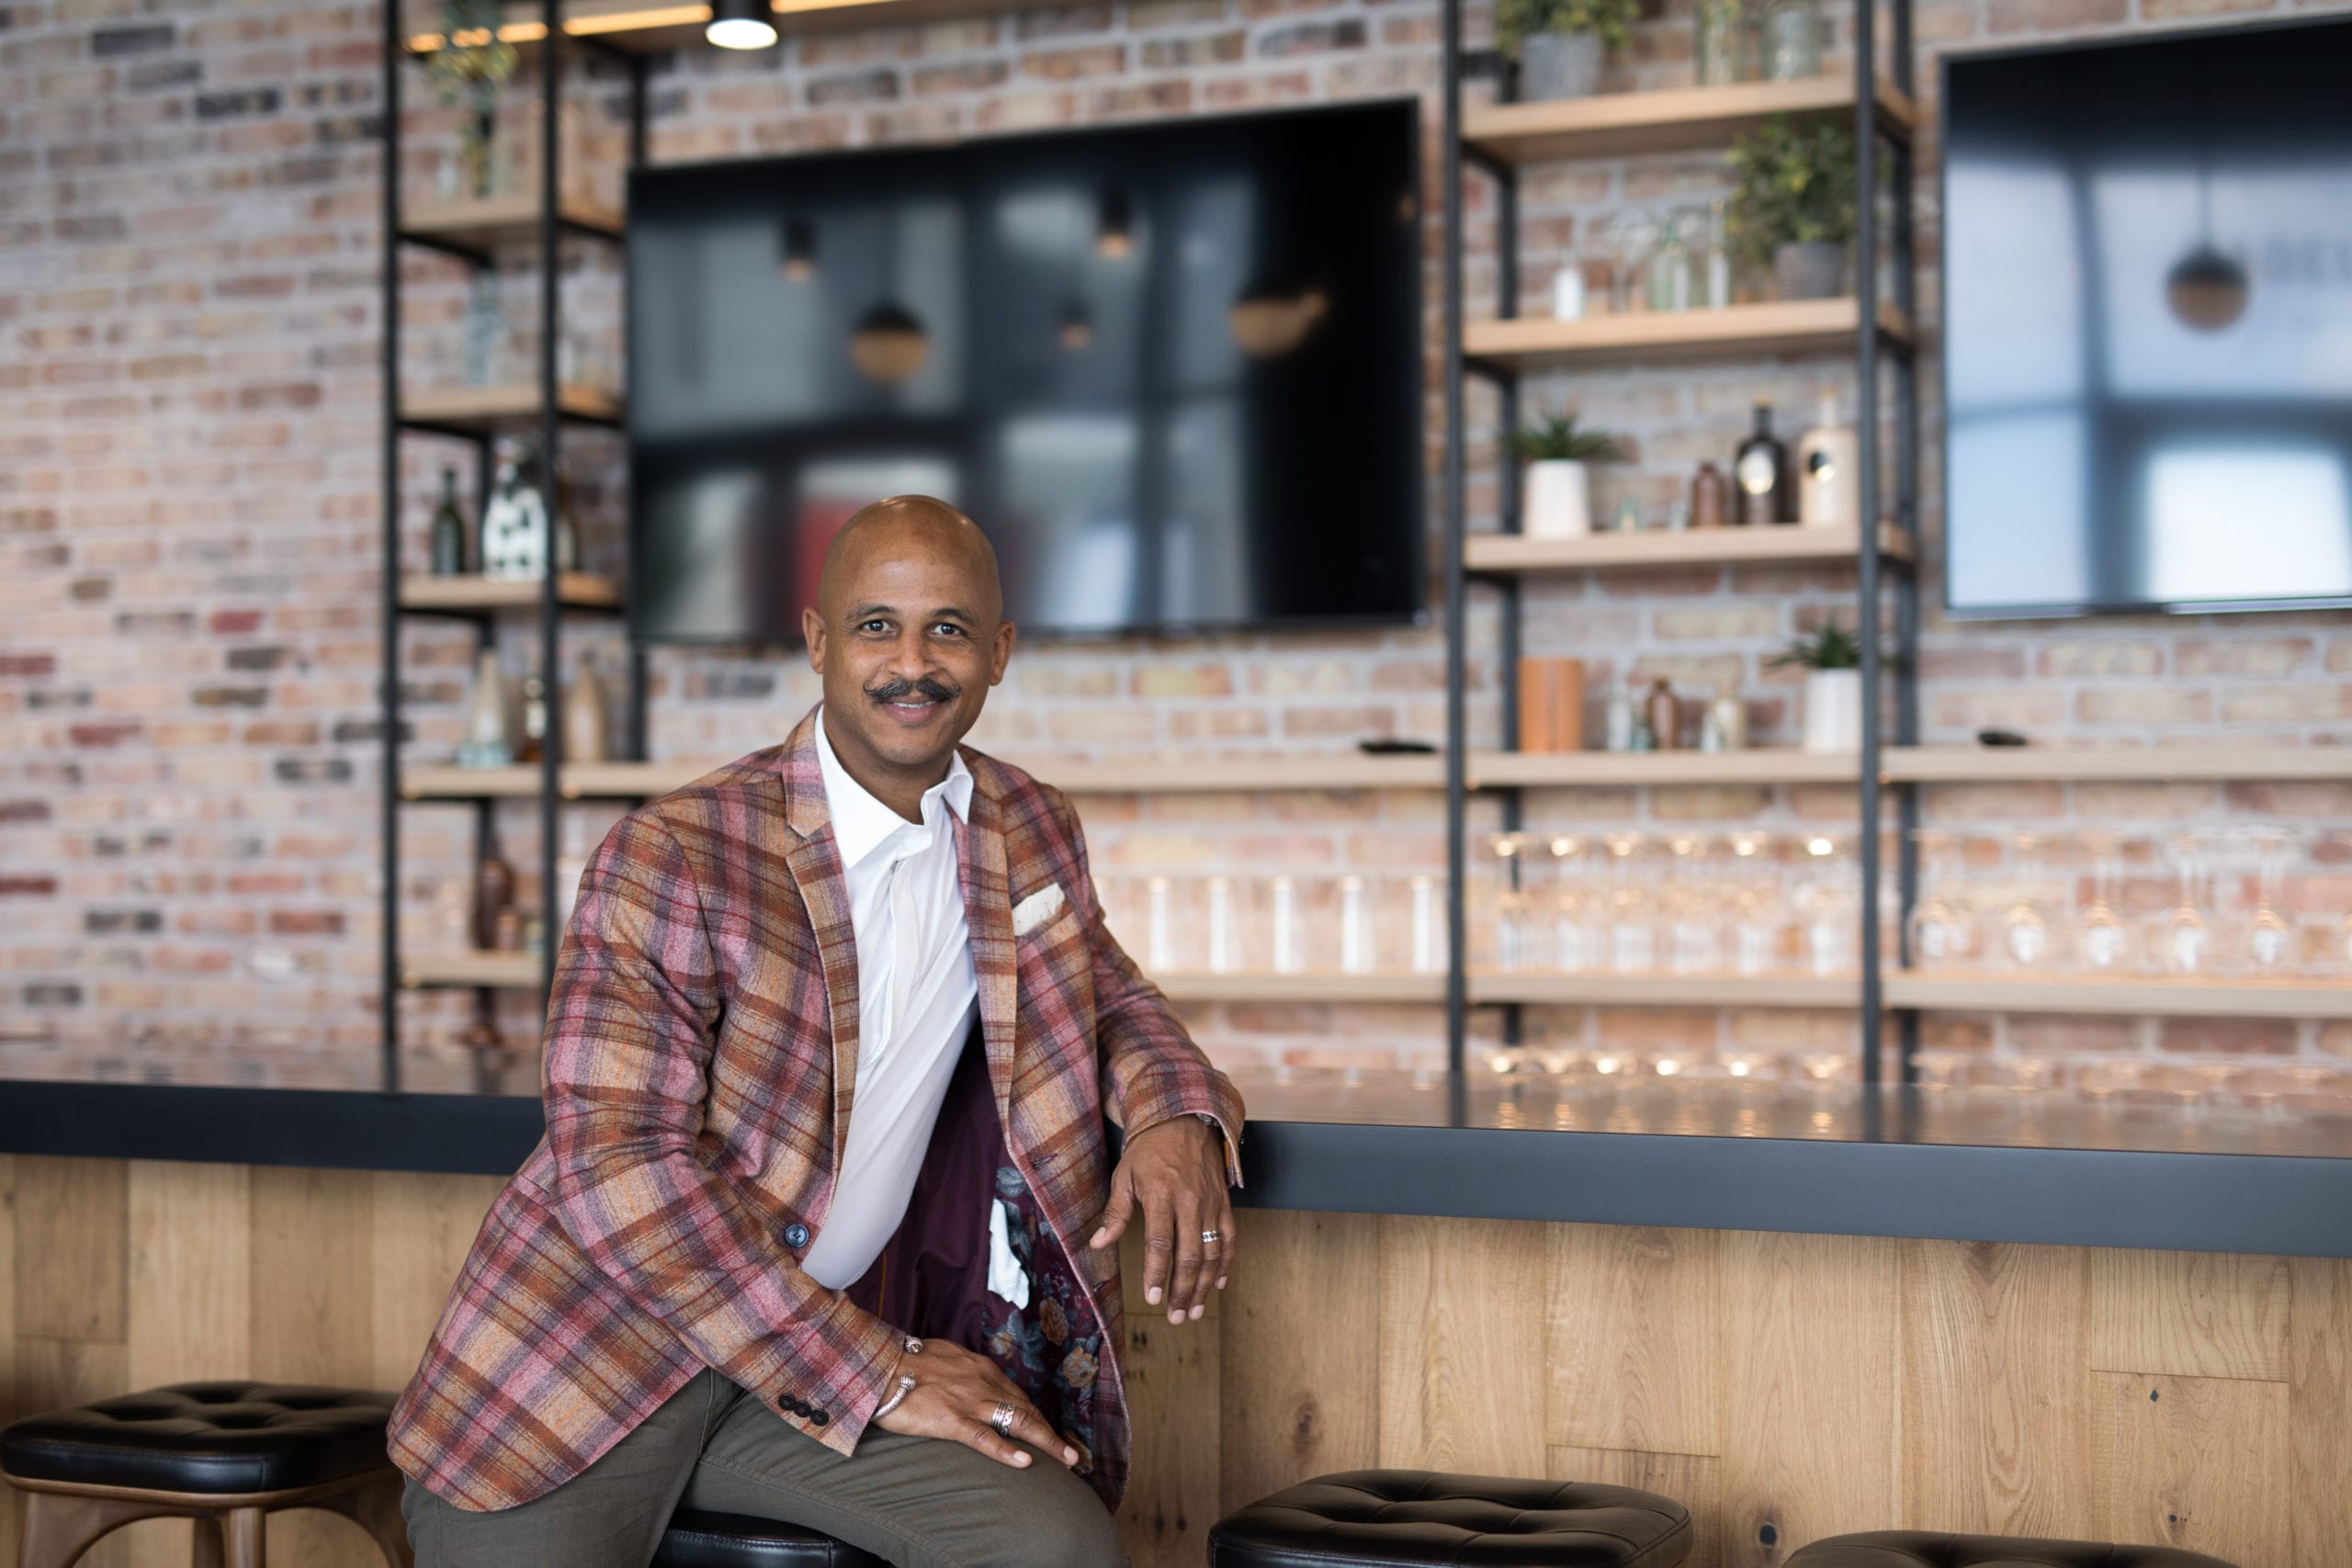 Fort Lauderdale Illustrated Men of Style Bald African American male model with moustache wearing gray jeans, white shirt and multicolored jacket sitting up against a bar smiling